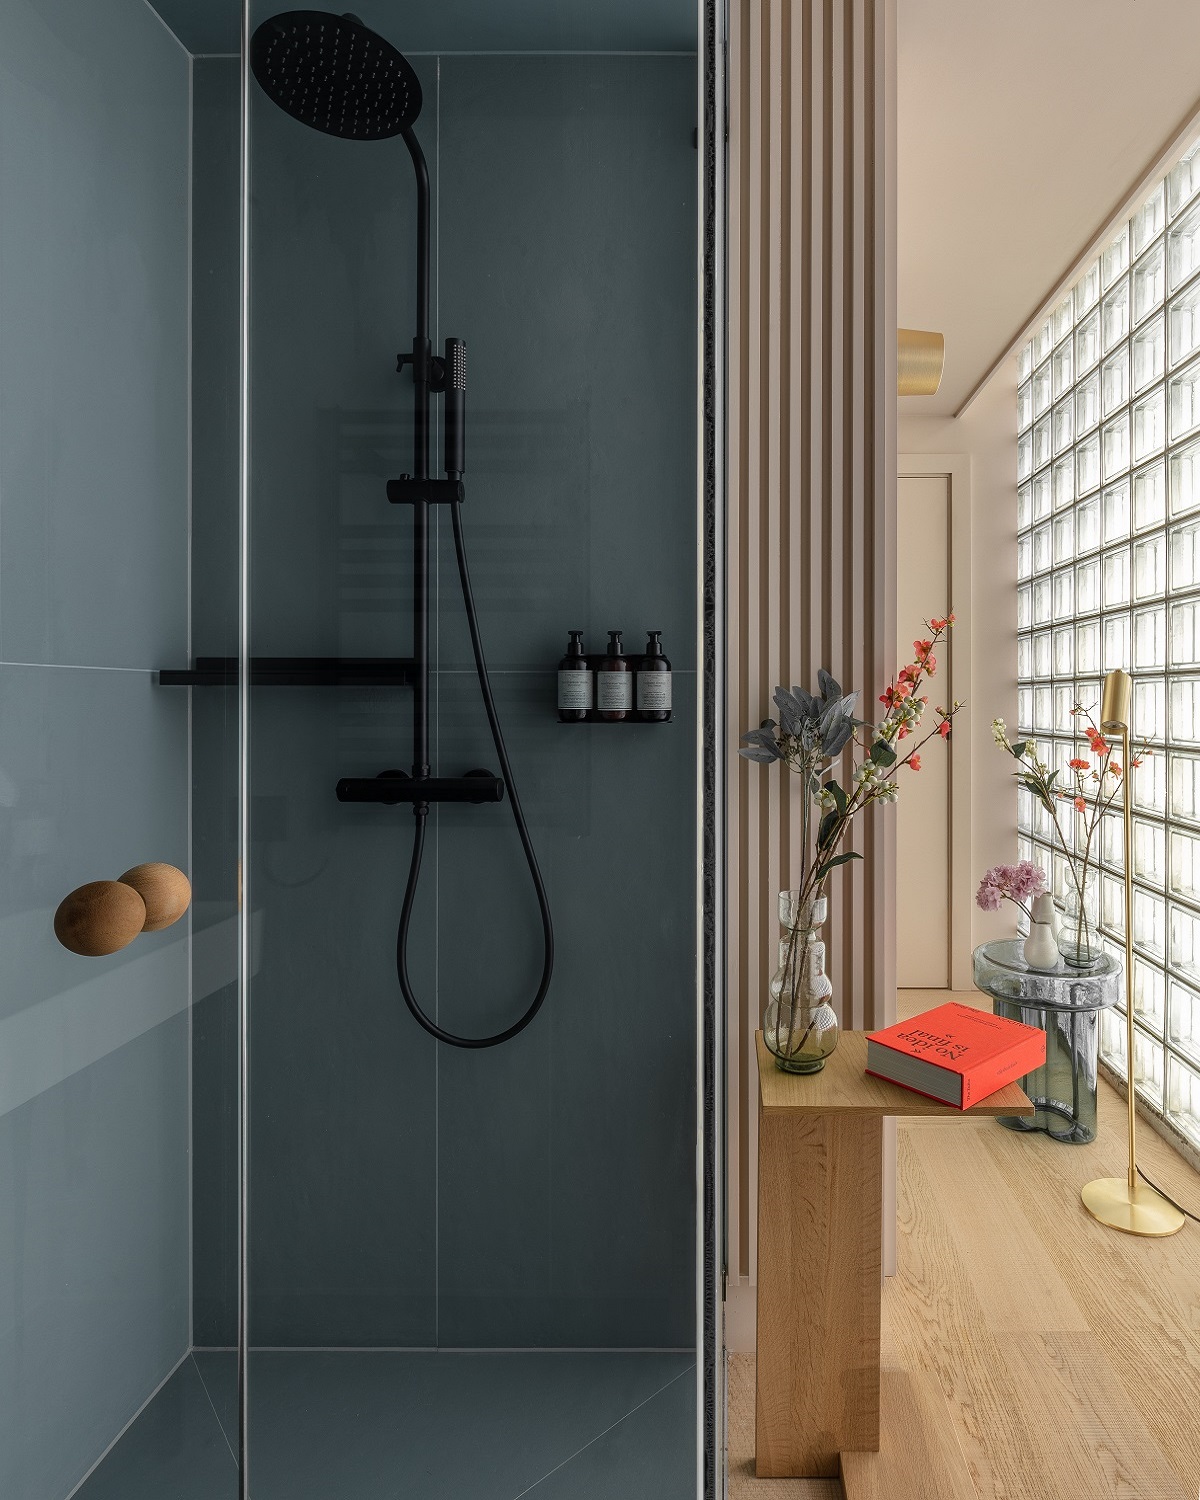 ensuite bathroom in gray with contemporary black fittings